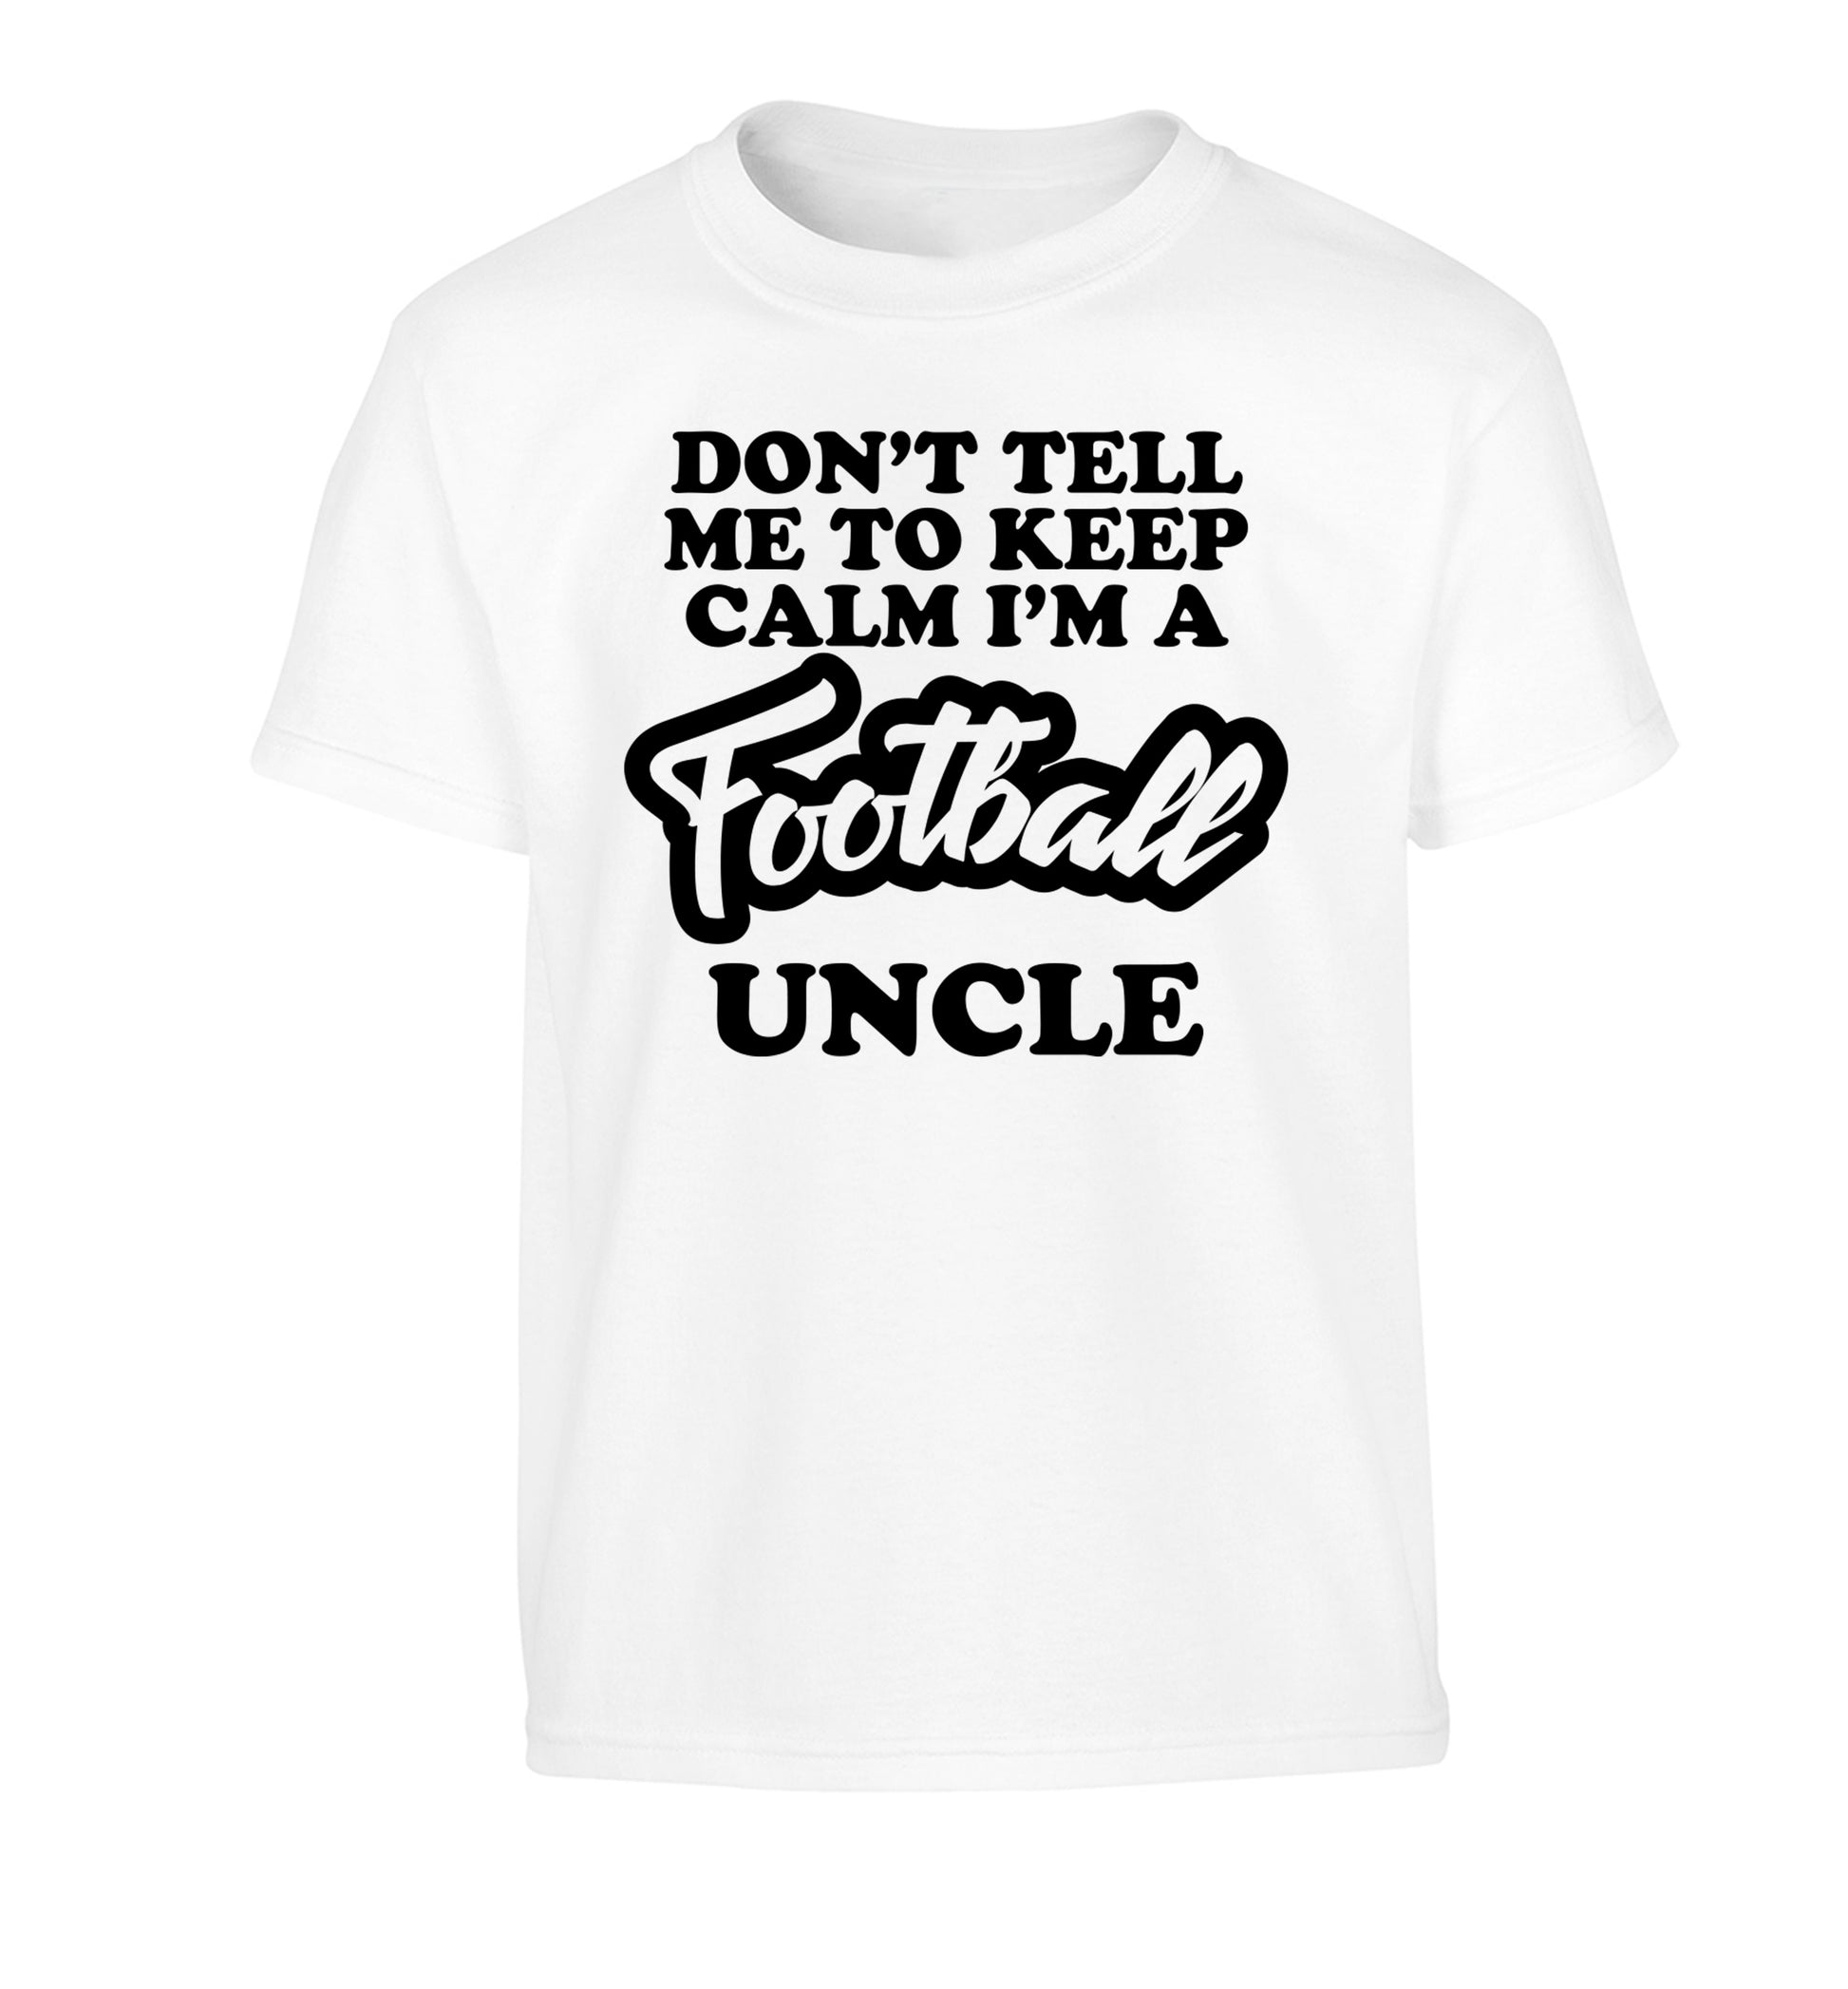 Worlds most amazing football uncle Children's white Tshirt 12-14 Years